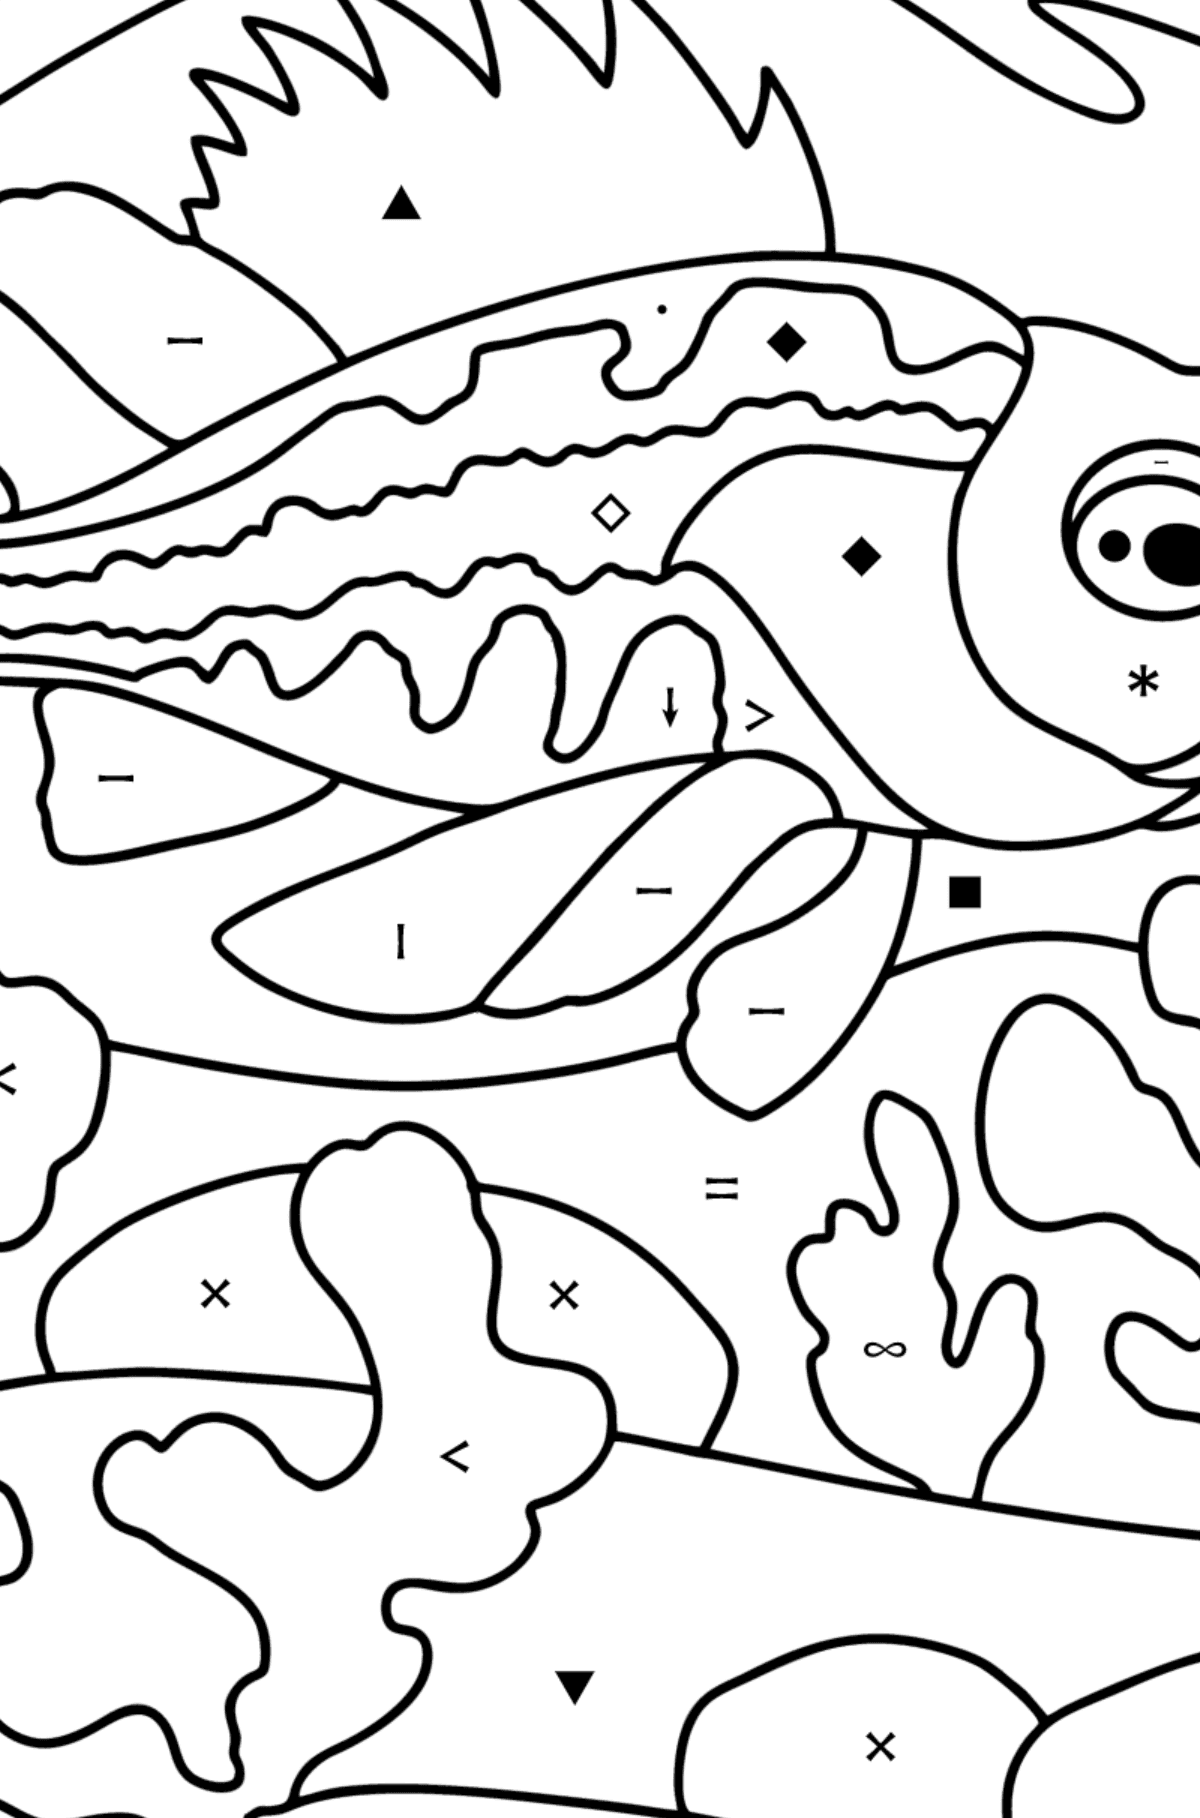 Sea bass coloring page - Coloring by Symbols for Kids